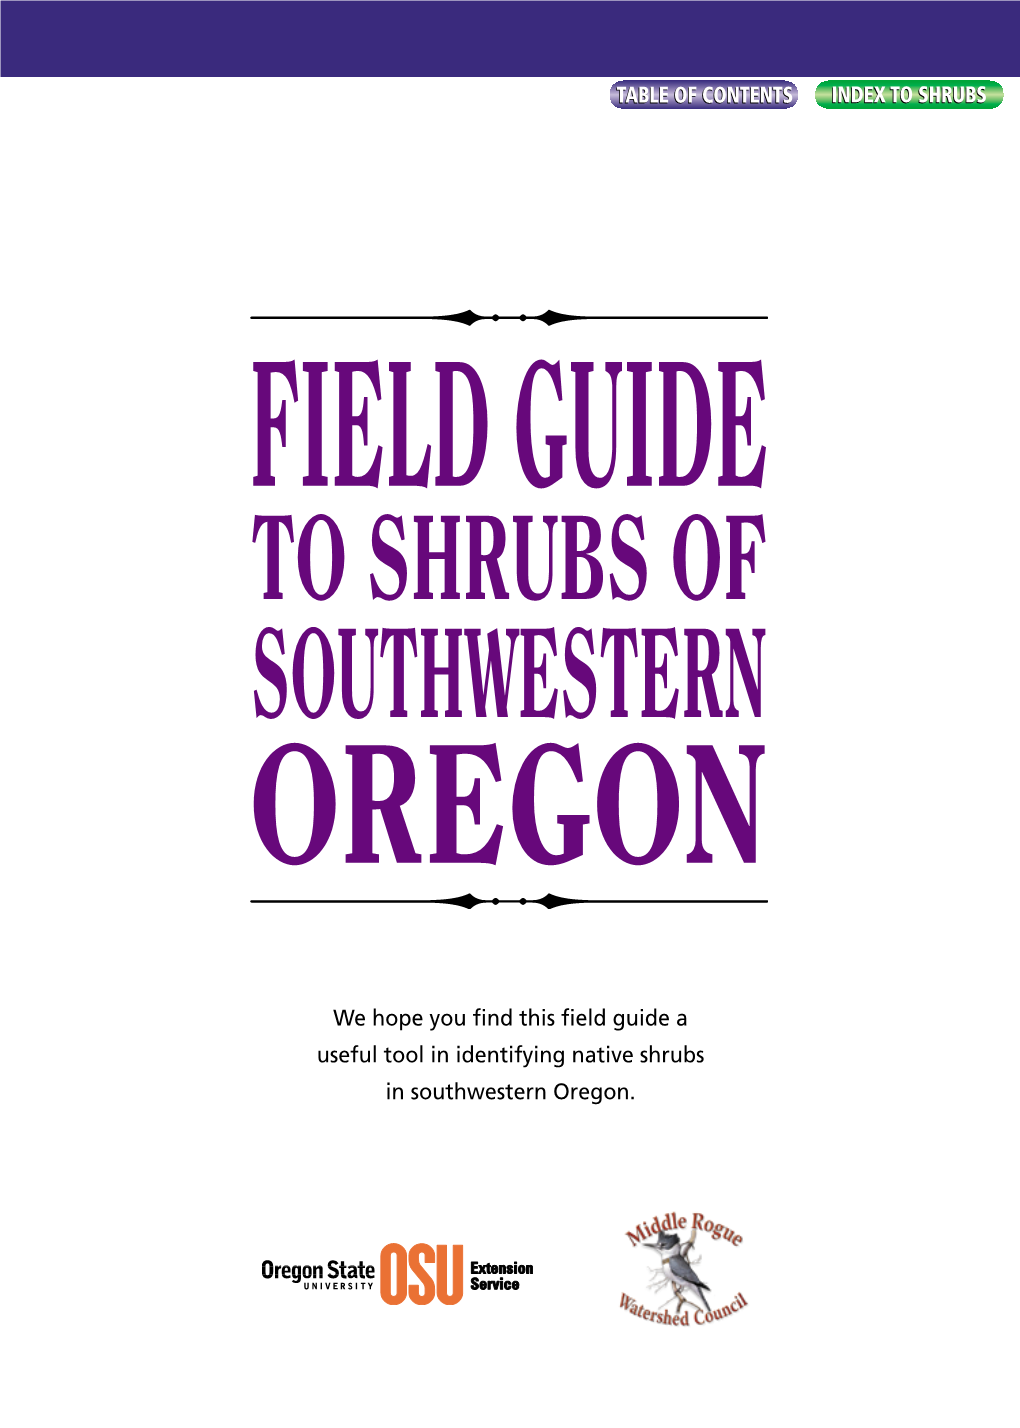 We Hope You Find This Field Guide a Useful Tool in Identifying Native Shrubs in Southwestern Oregon